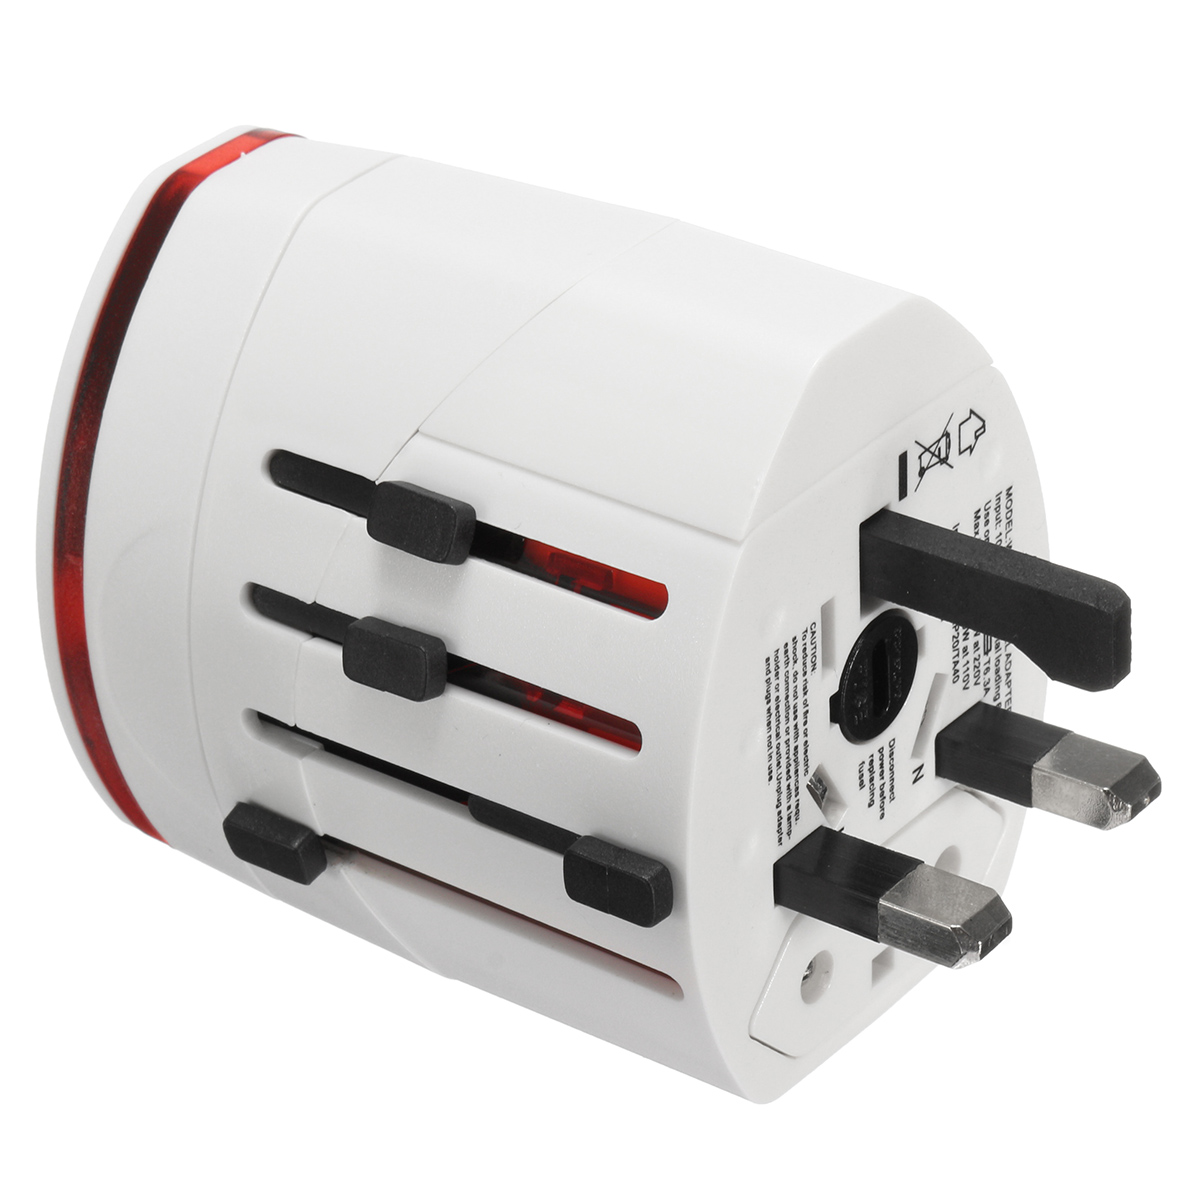 Universal-Travel-AC-Power-Charger-Adapter-Converter-AUUKUSEU-Plug-with-2-USB-Ports-1289576-7